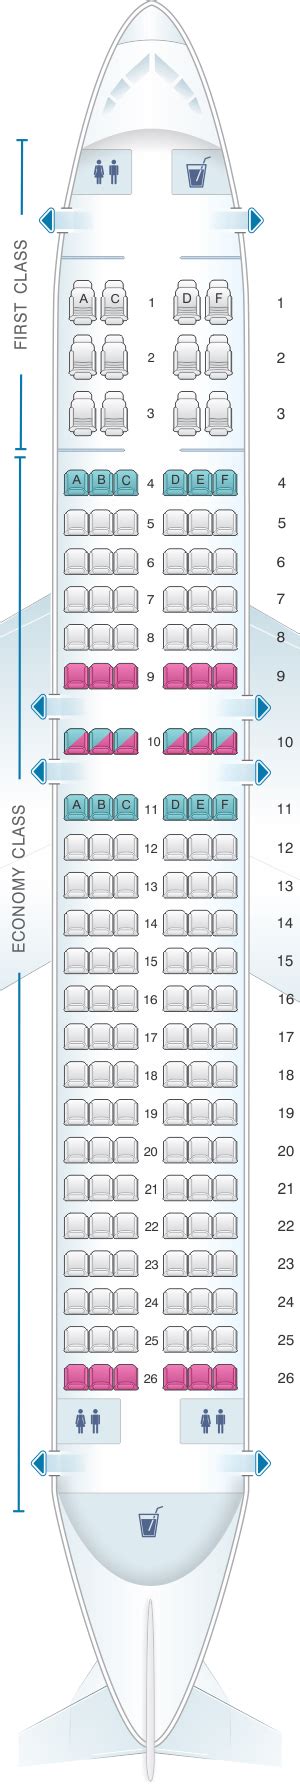 Find the best seat wiht our American Airlines Boeing 787-9 (789) seating chart. Use this seat map to get the most comfortable seats, legroom and recline before booking. Find the best seat wiht our American Airlines Boeing 787-9 (789) seating chart. ... Airbus A320 150 seats. Airbus A321 Transcon 102 seats. Airbus A321 v1 181 seats.